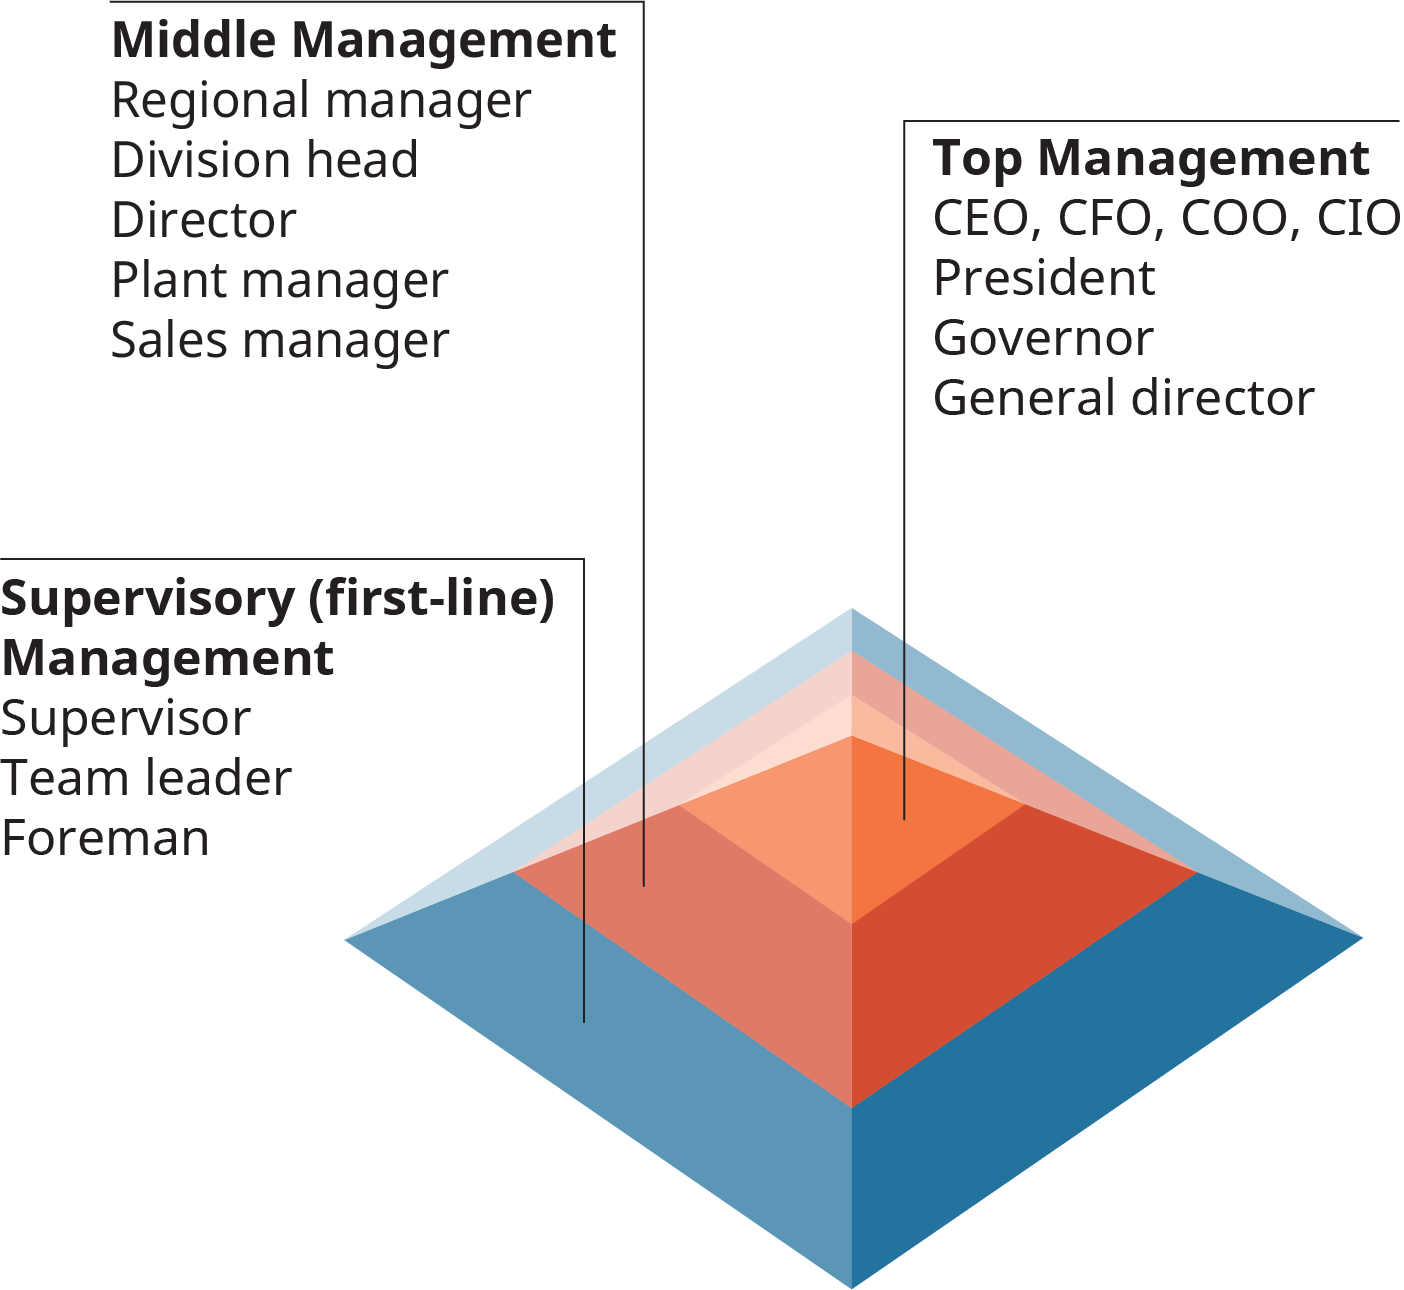 The bottom level is labeled as supervisory, or first line, management. This layer includes the supervisor, team leader, and foreman. The next level up is labeled middle management, and includes the regional manager, division manager, director, plant manager, and sales manager. The highest level, or peak of the pyramid, is labeled top management. Top management includes the C E O; C F O; C O O; C I O; the president, governor, and general director.